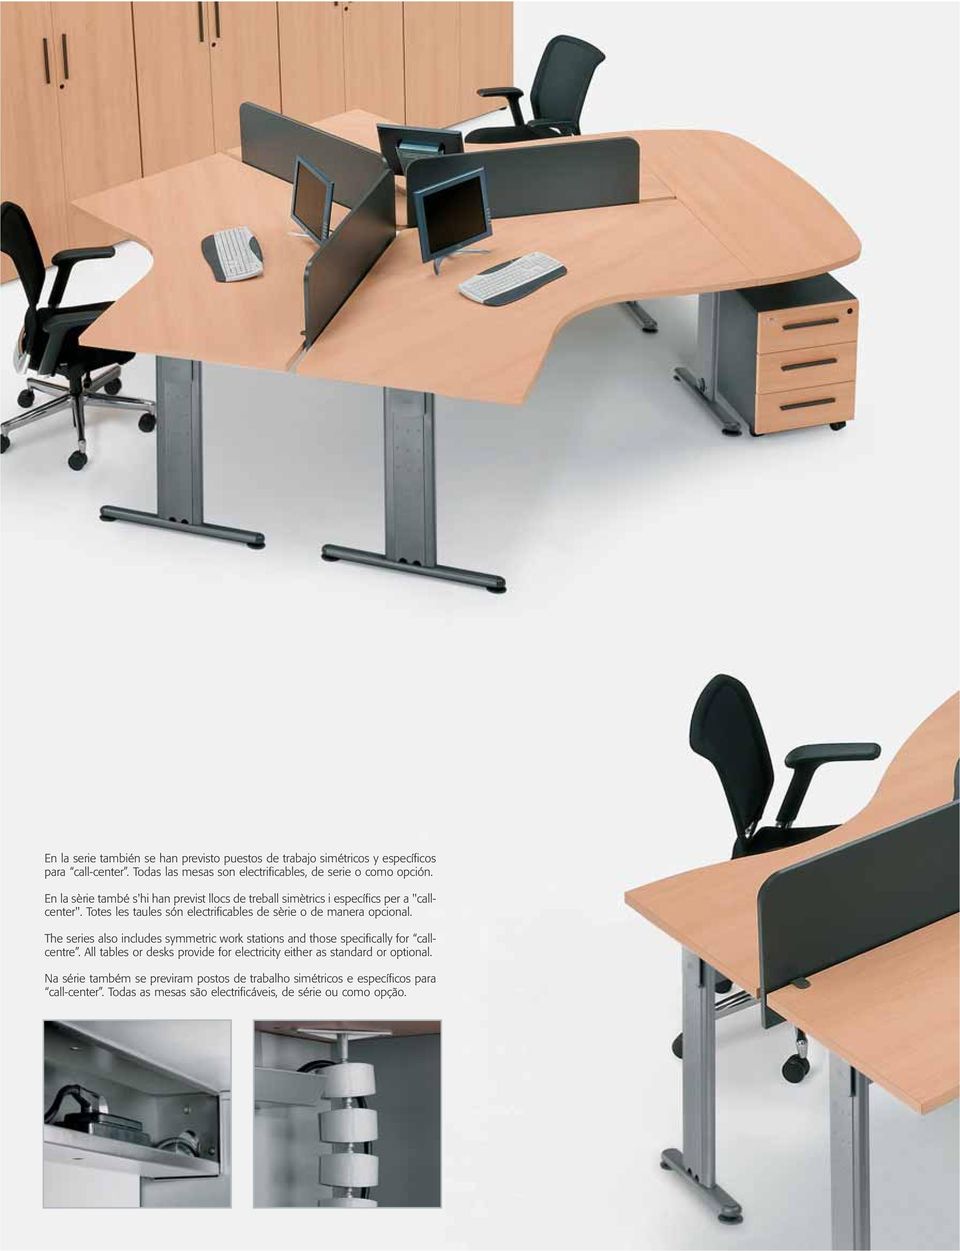 Totes les taules són electrificables de sèrie o de manera opcional. The series also includes symmetric work stations and those specifically for callcentre.